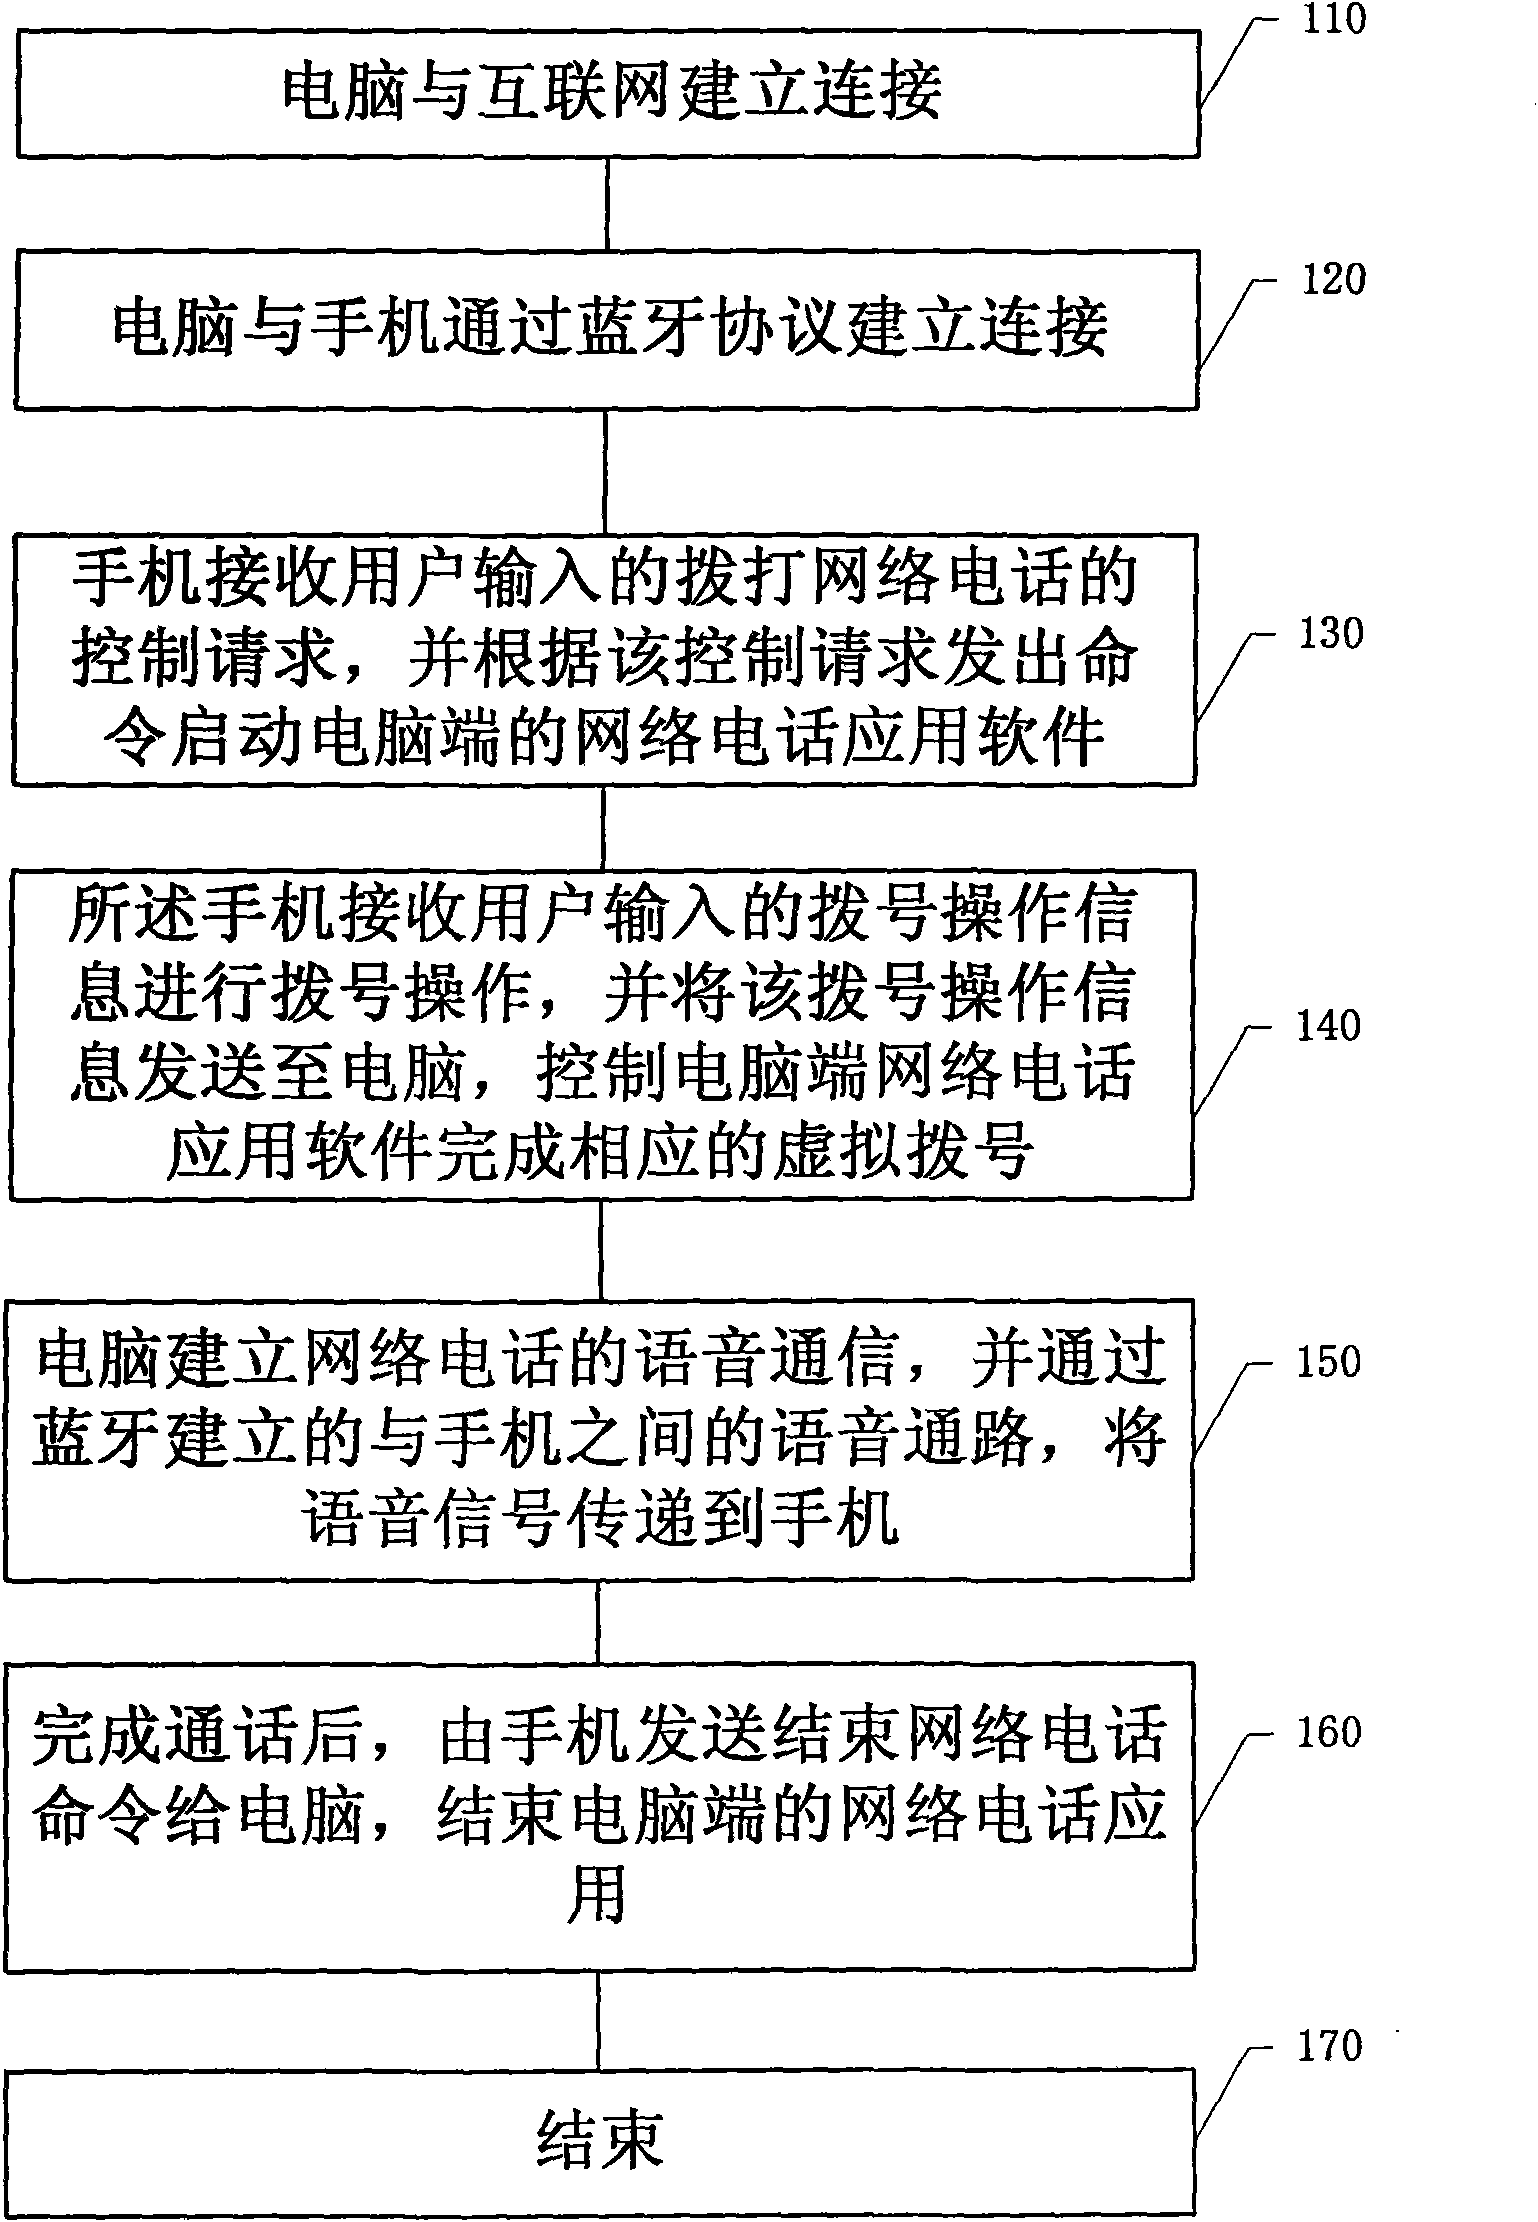 Method and system for dialing network telephone by using mobile phone